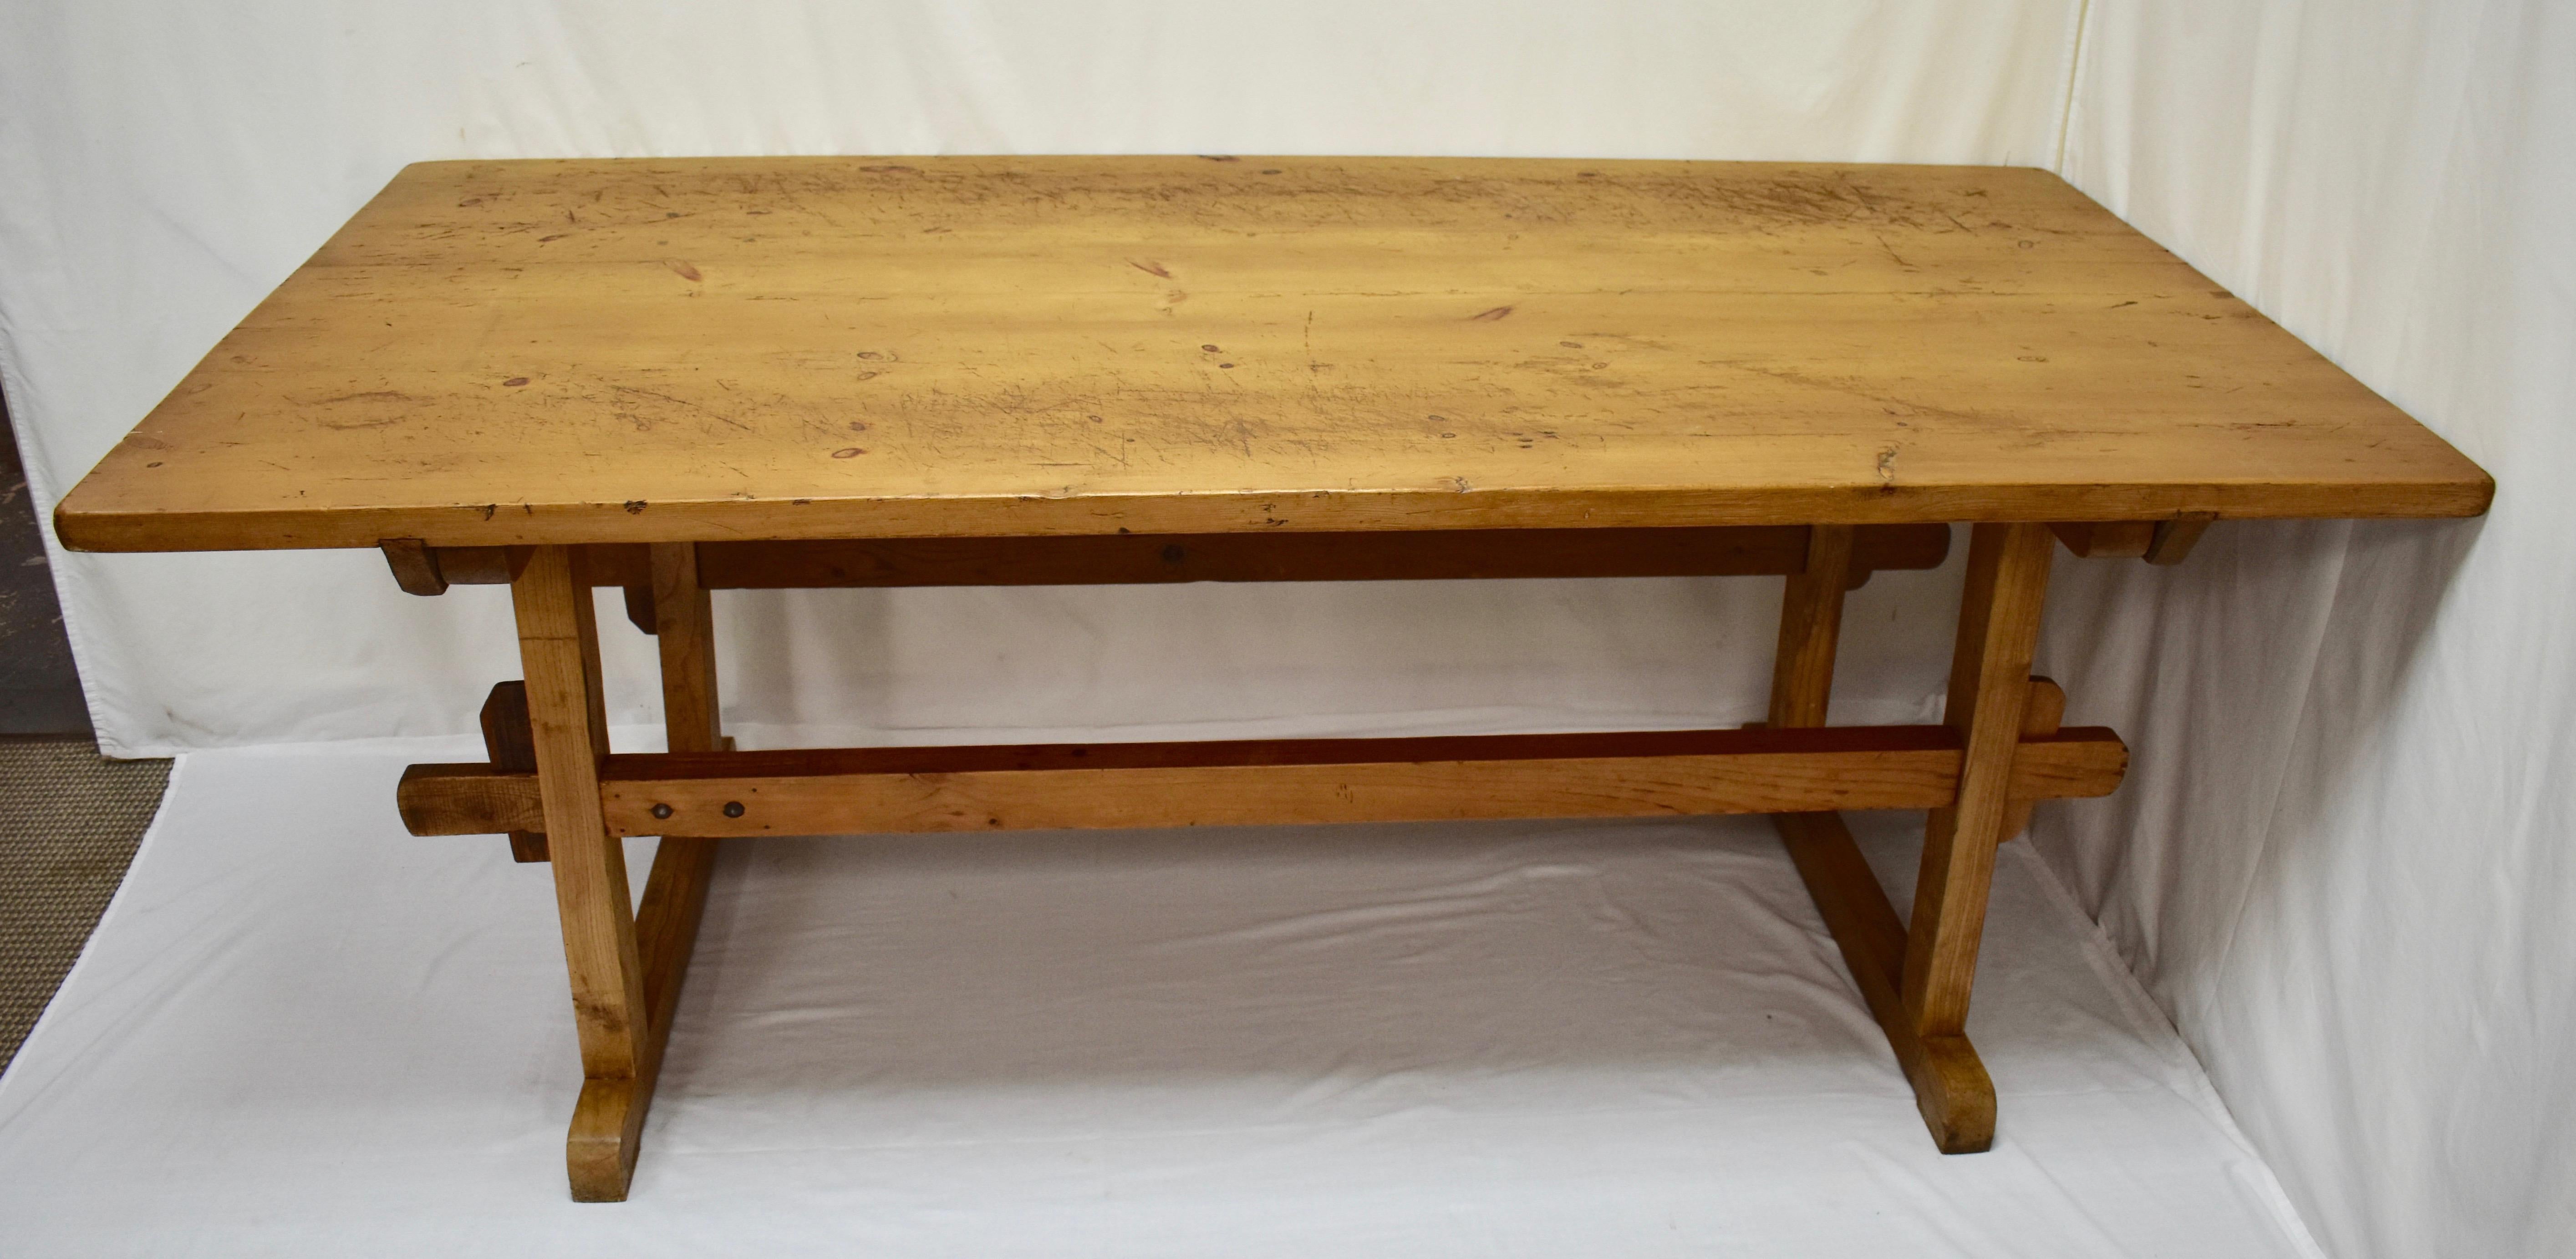 This outstanding pine and oak trestle table has a three board pine top, the outside boards are 16” wide, with two sturdy cleats dovetailed into the underside which peg into the top rails of the base for stability. The trestle base itself is of oak